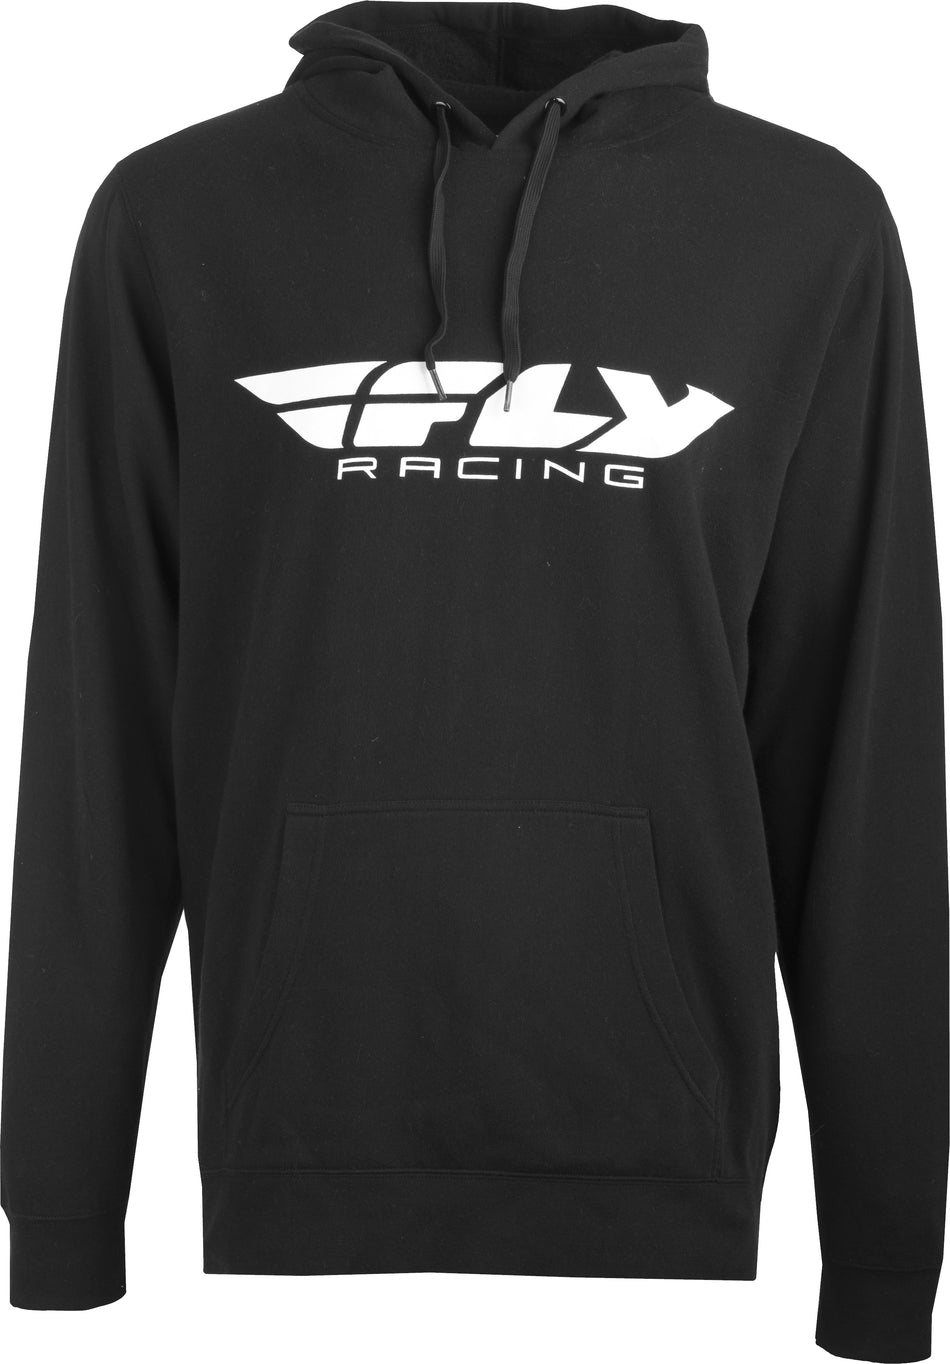 FLY RACING Fly Corporate Pullover Hoodie Black Lg 354-0031L